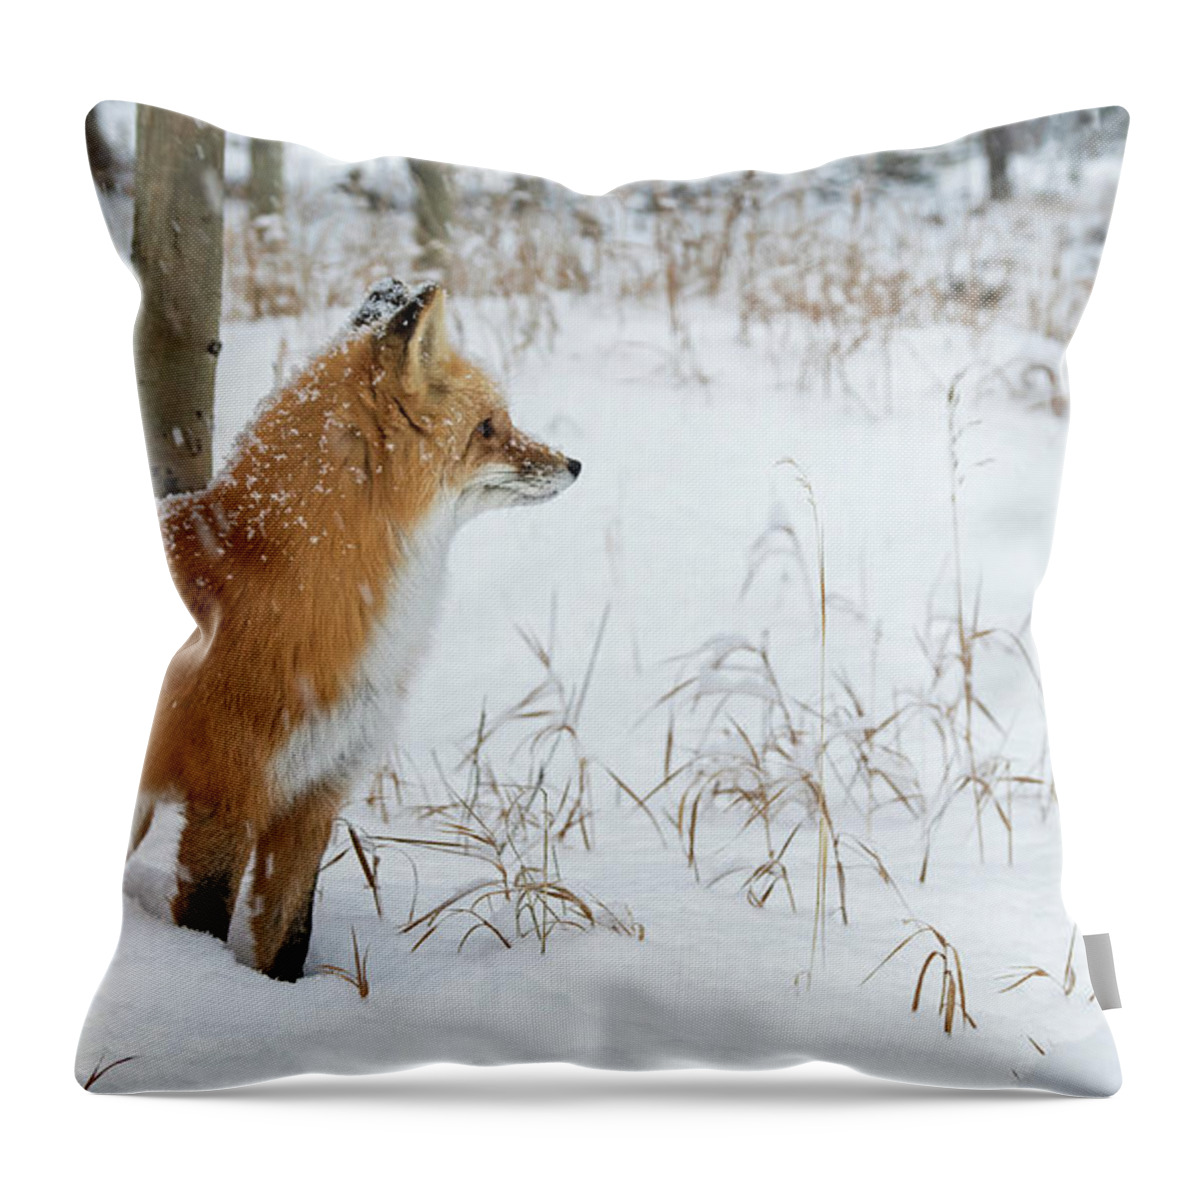 Fox Throw Pillow featuring the photograph In The Distance by Mindy Musick King